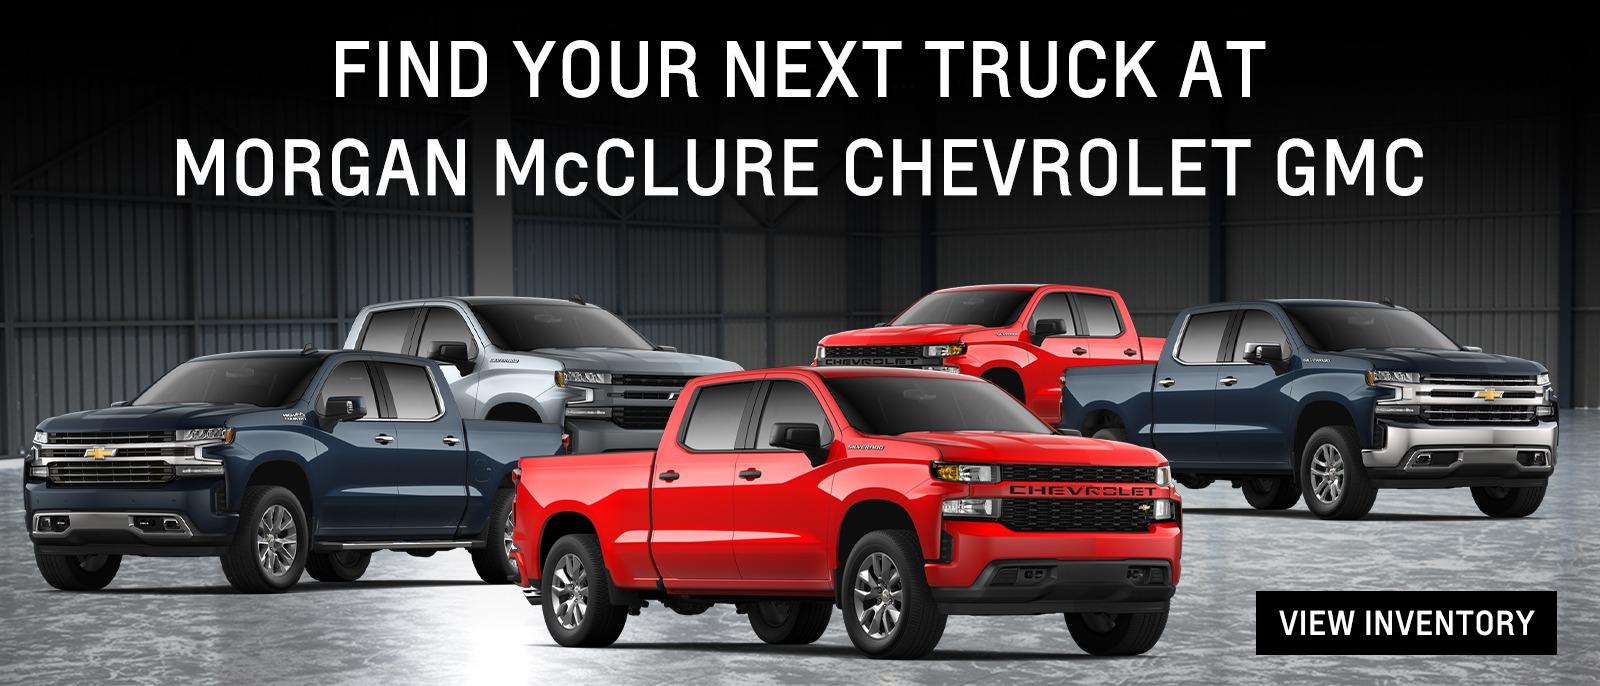 Find Your Next Truck at Morgan McClure